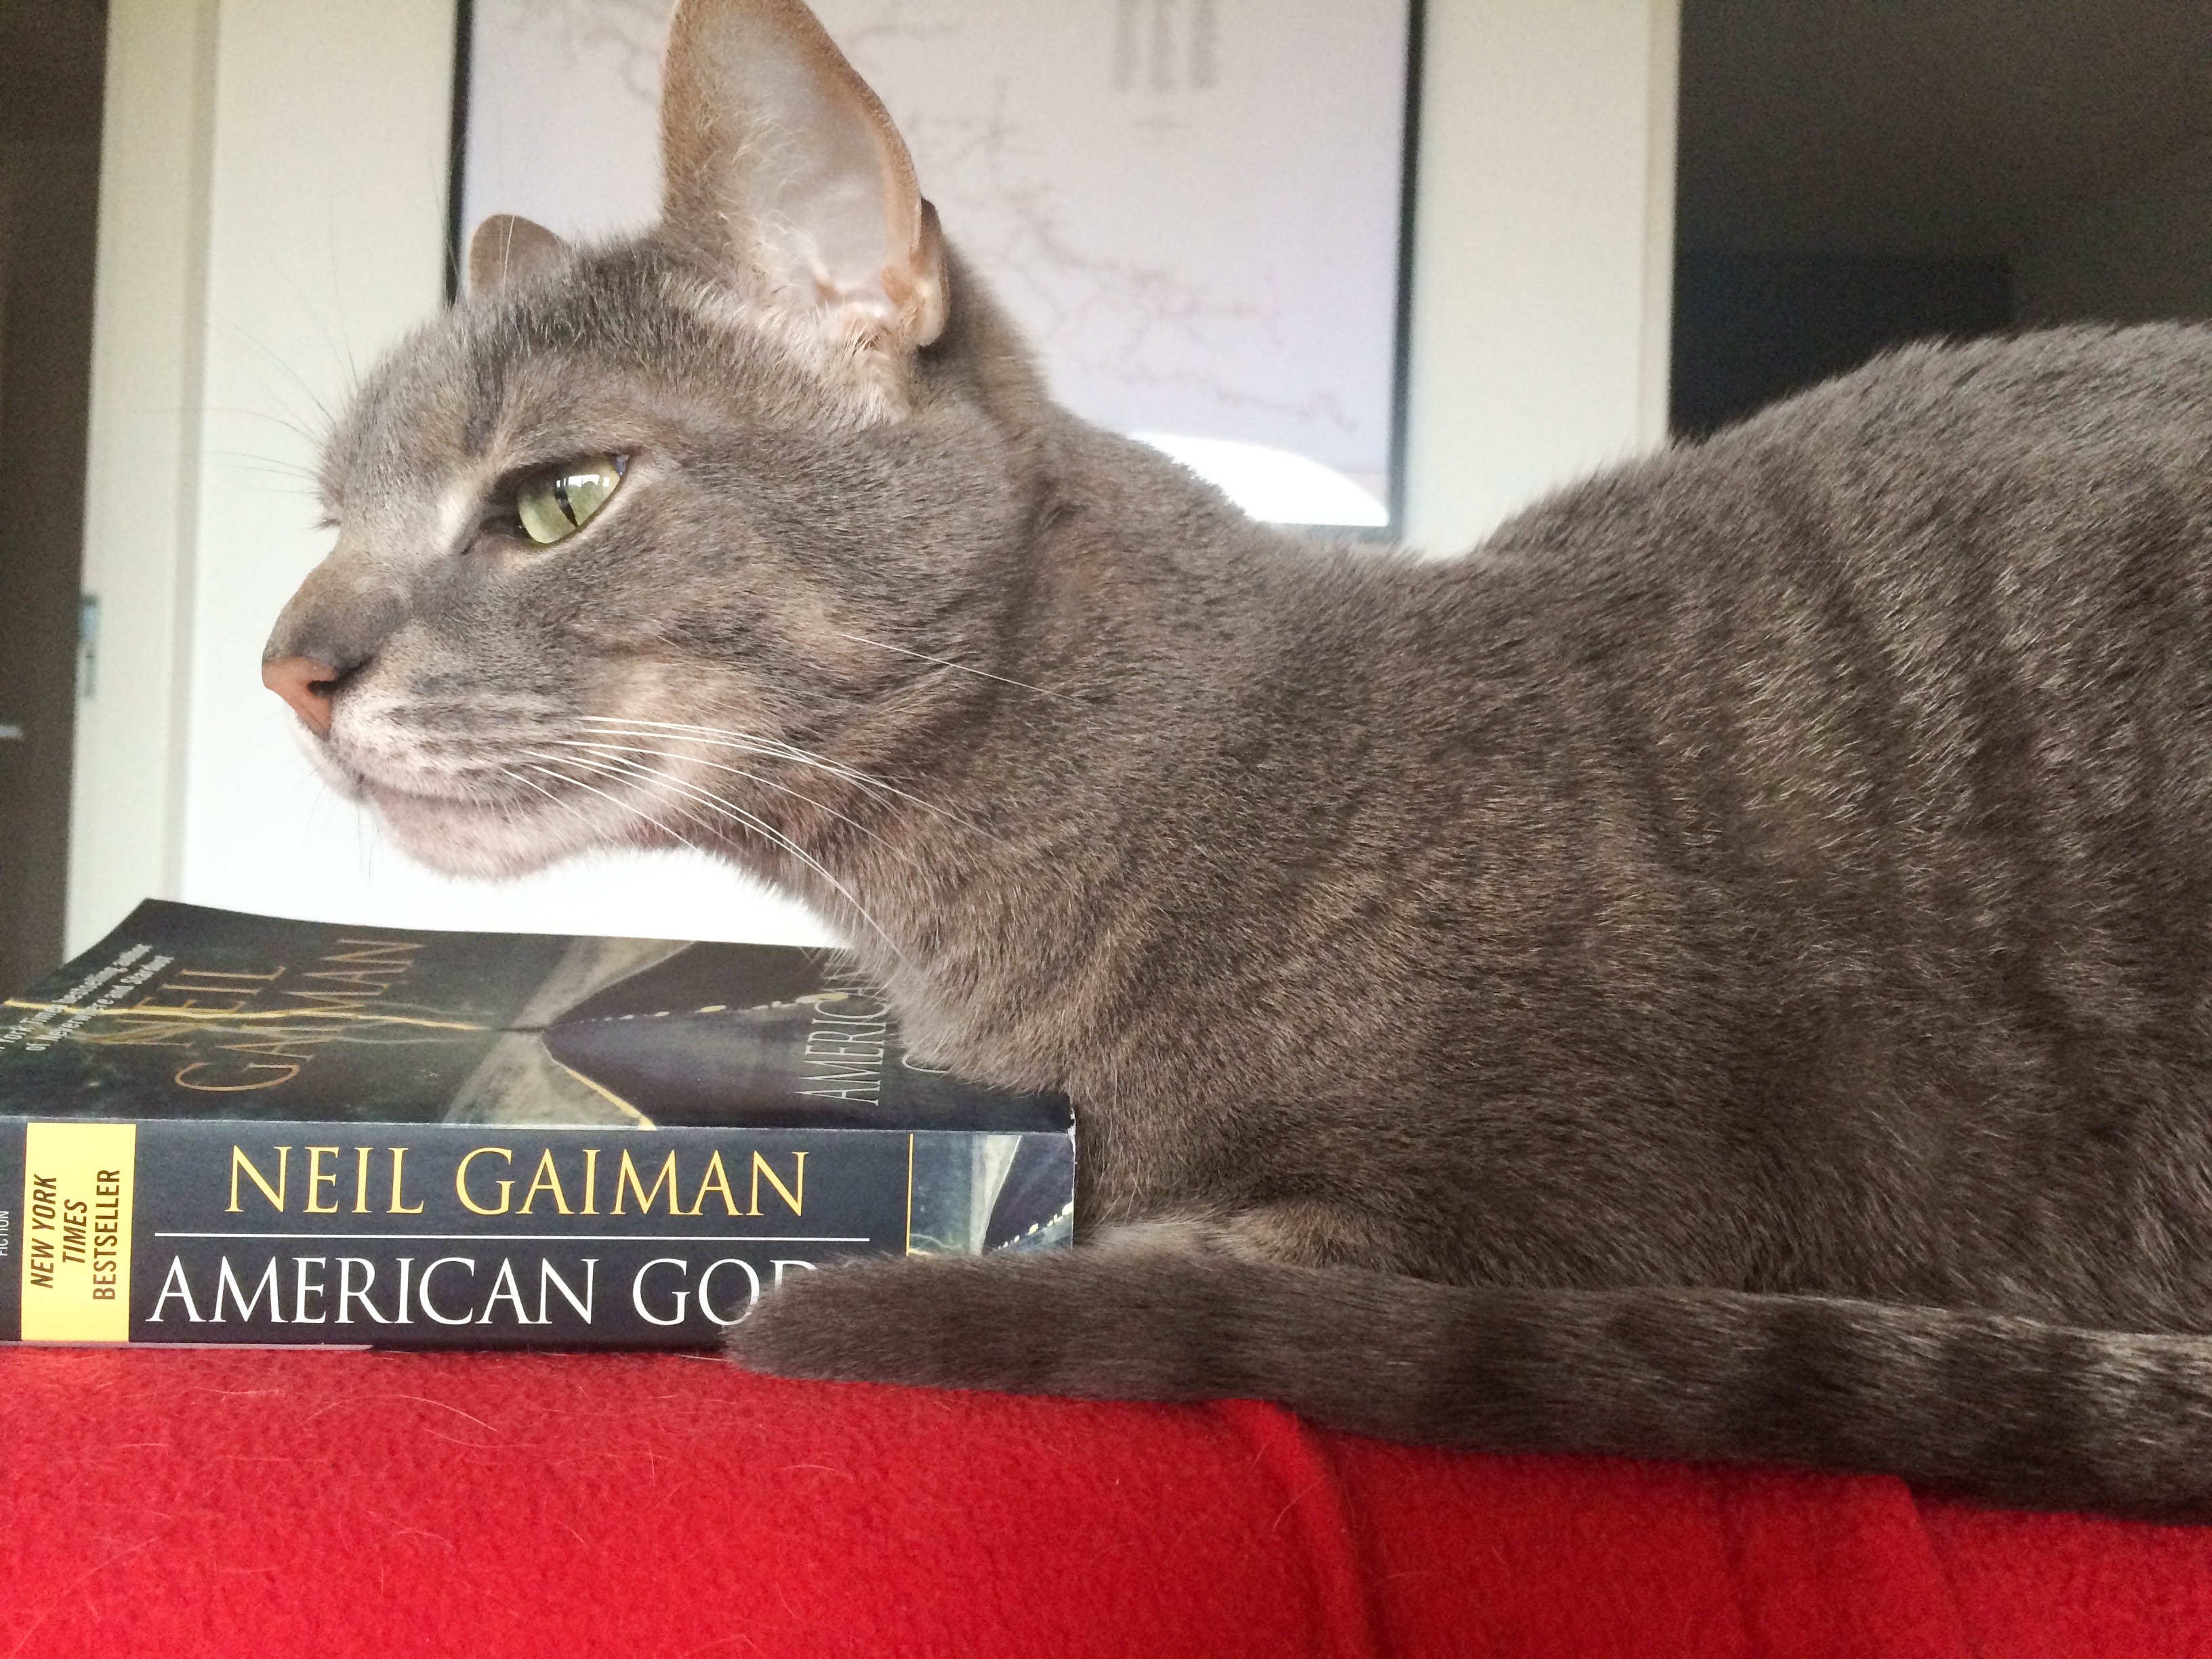 Ollie is contemplating the themes in Neil Gaiman's book American Gods